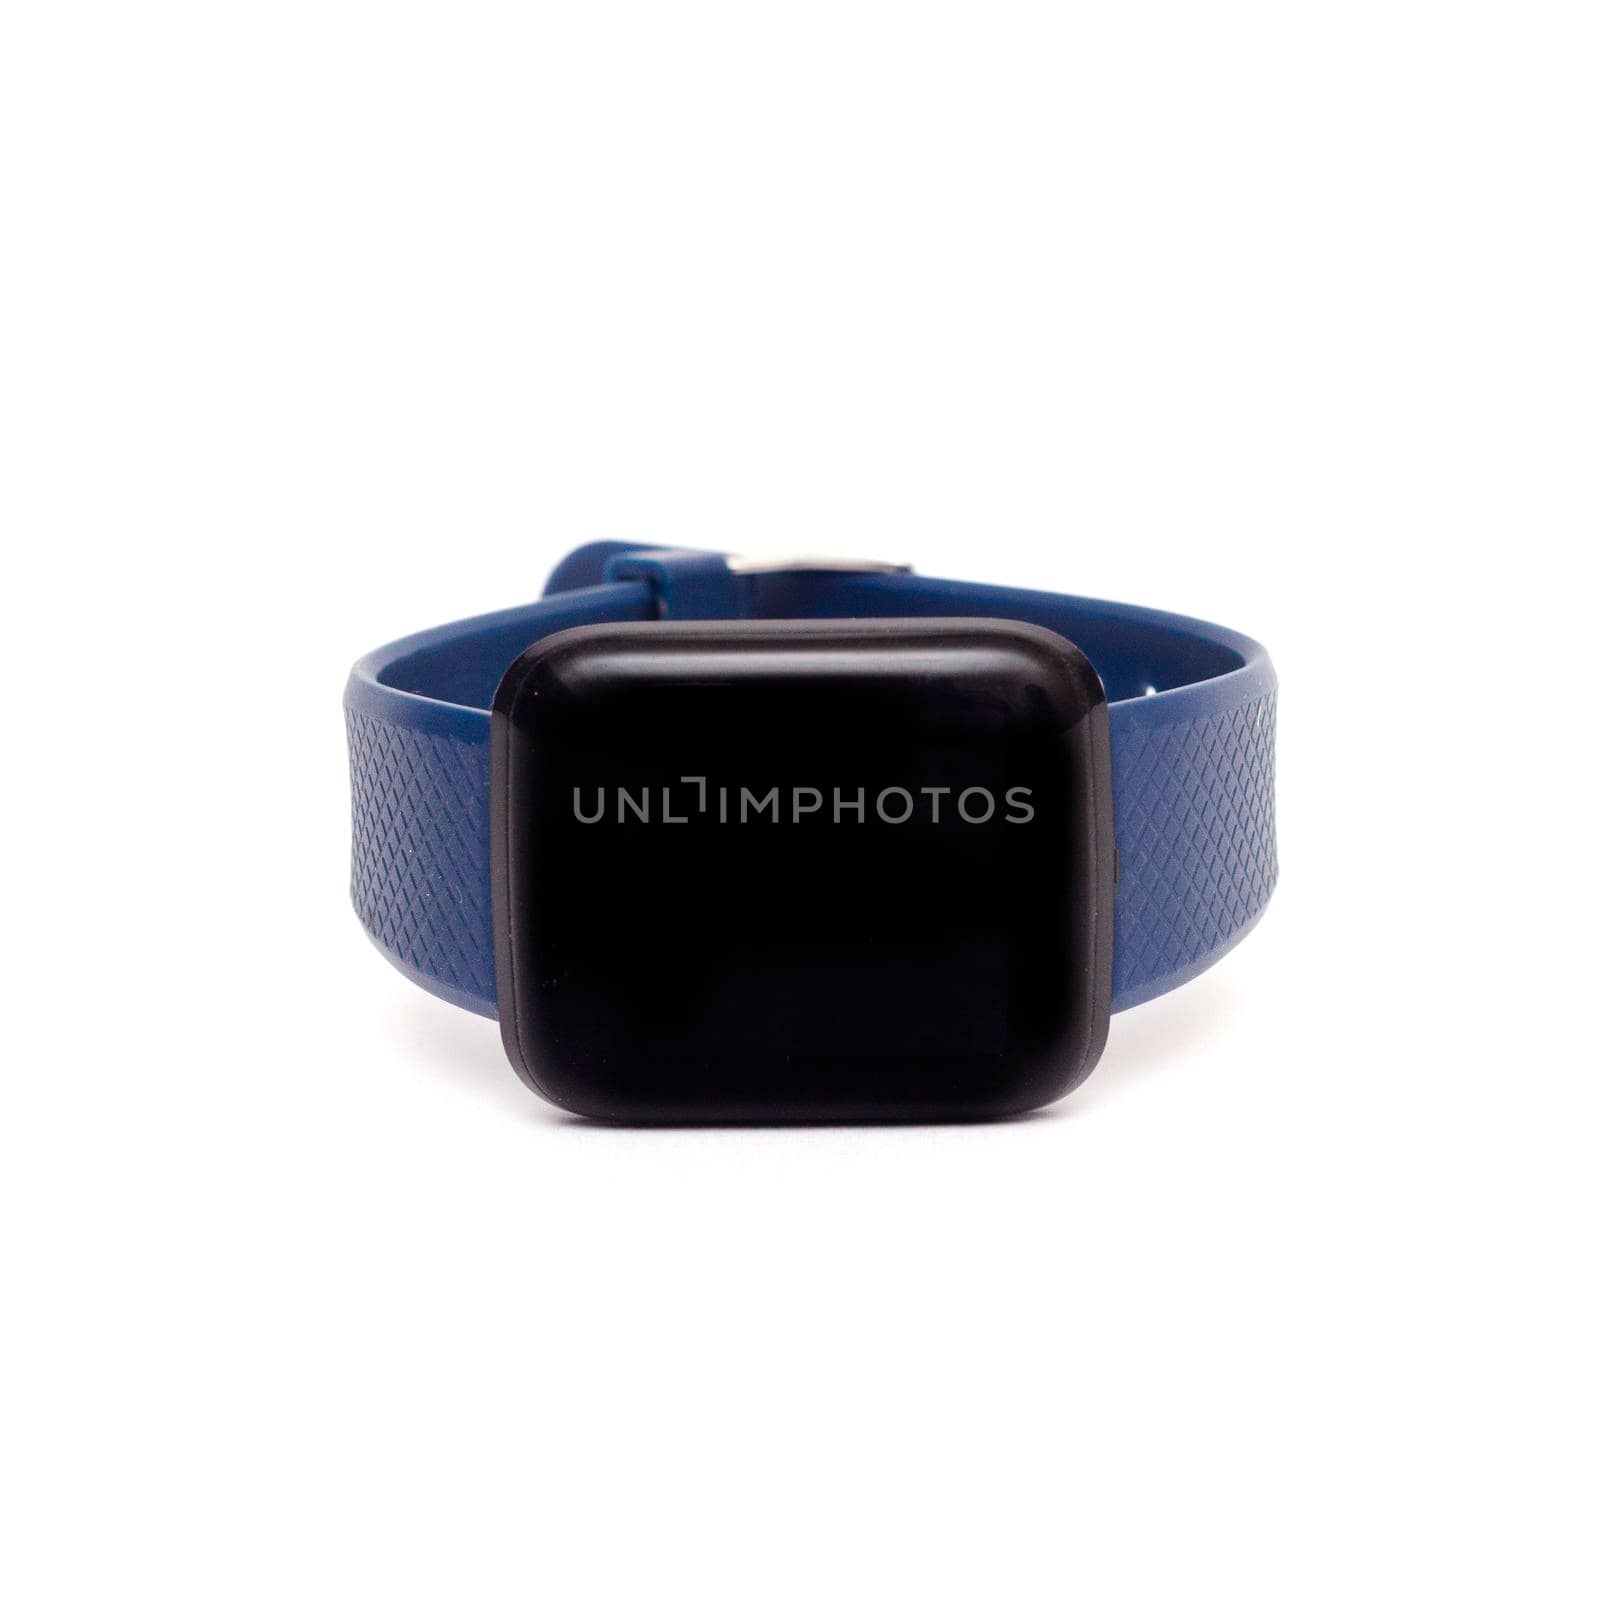 Smart watch with blue plastic strap isolated on white background.